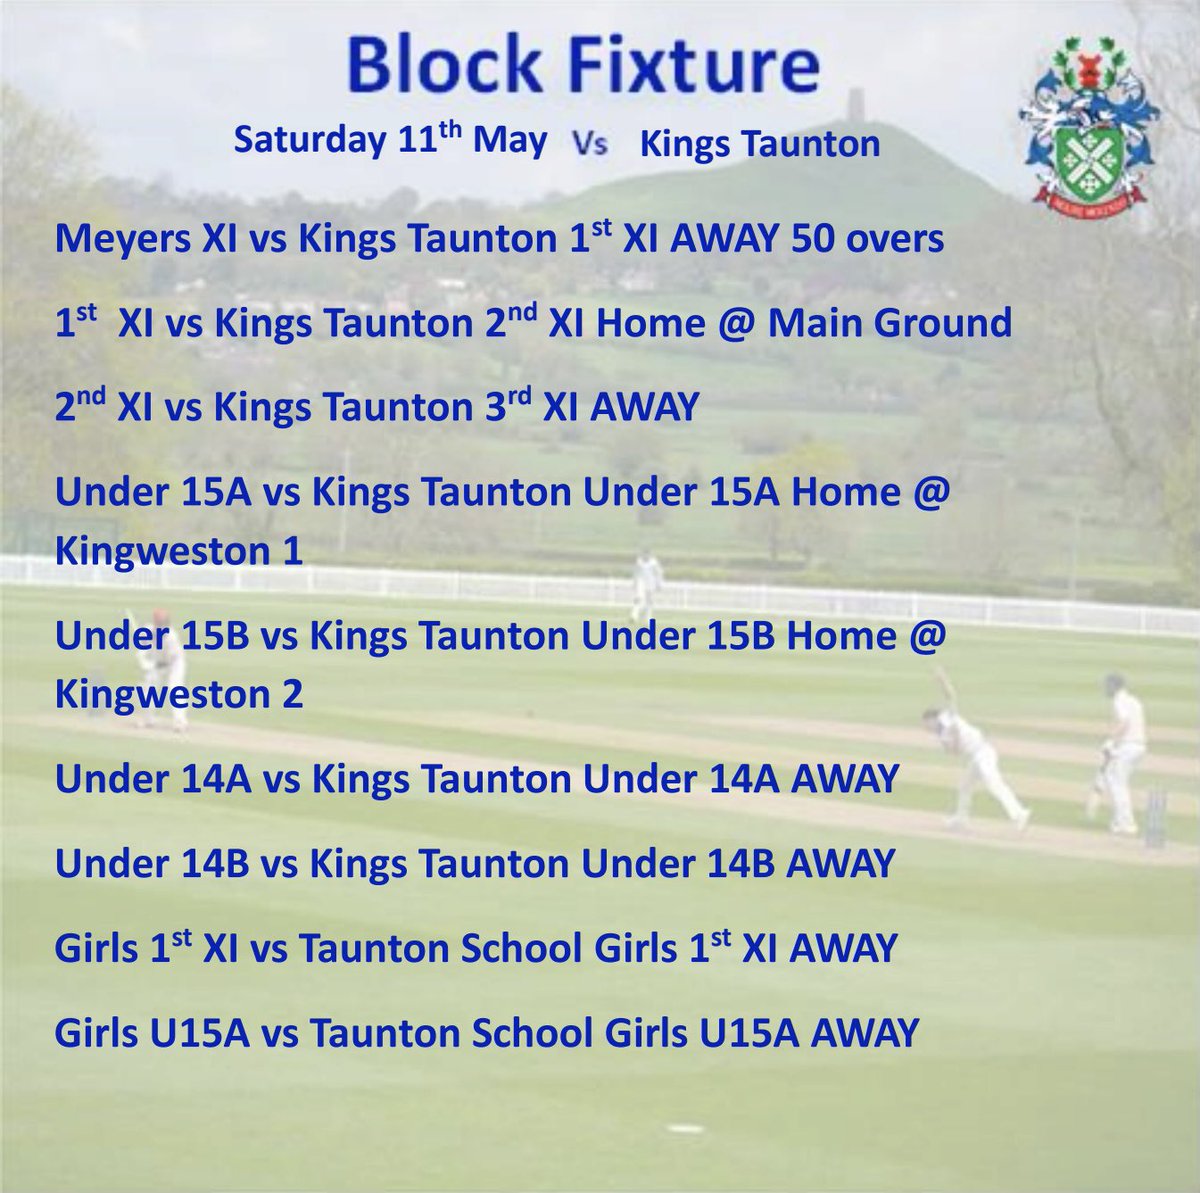 The return of the King’s College block has arrived with some blockbuster fixtures💥 Also, the Girls have two fixtures away at Taunton School. Go well everyone☀️